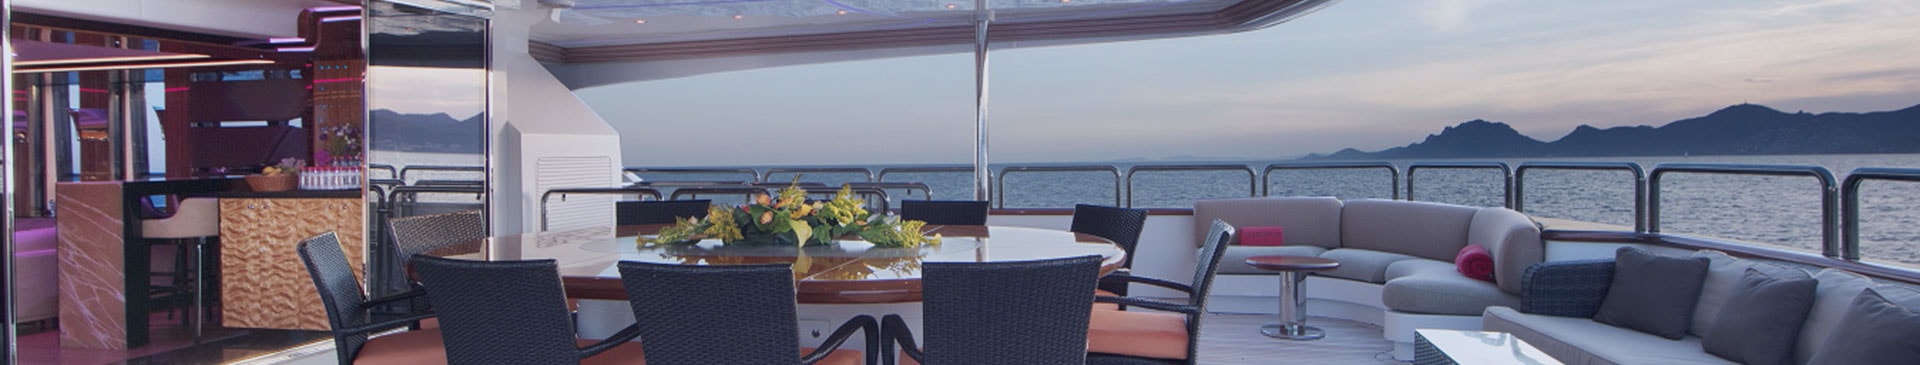 Five Reasons to Hire a Yacht for Valentine’s Day